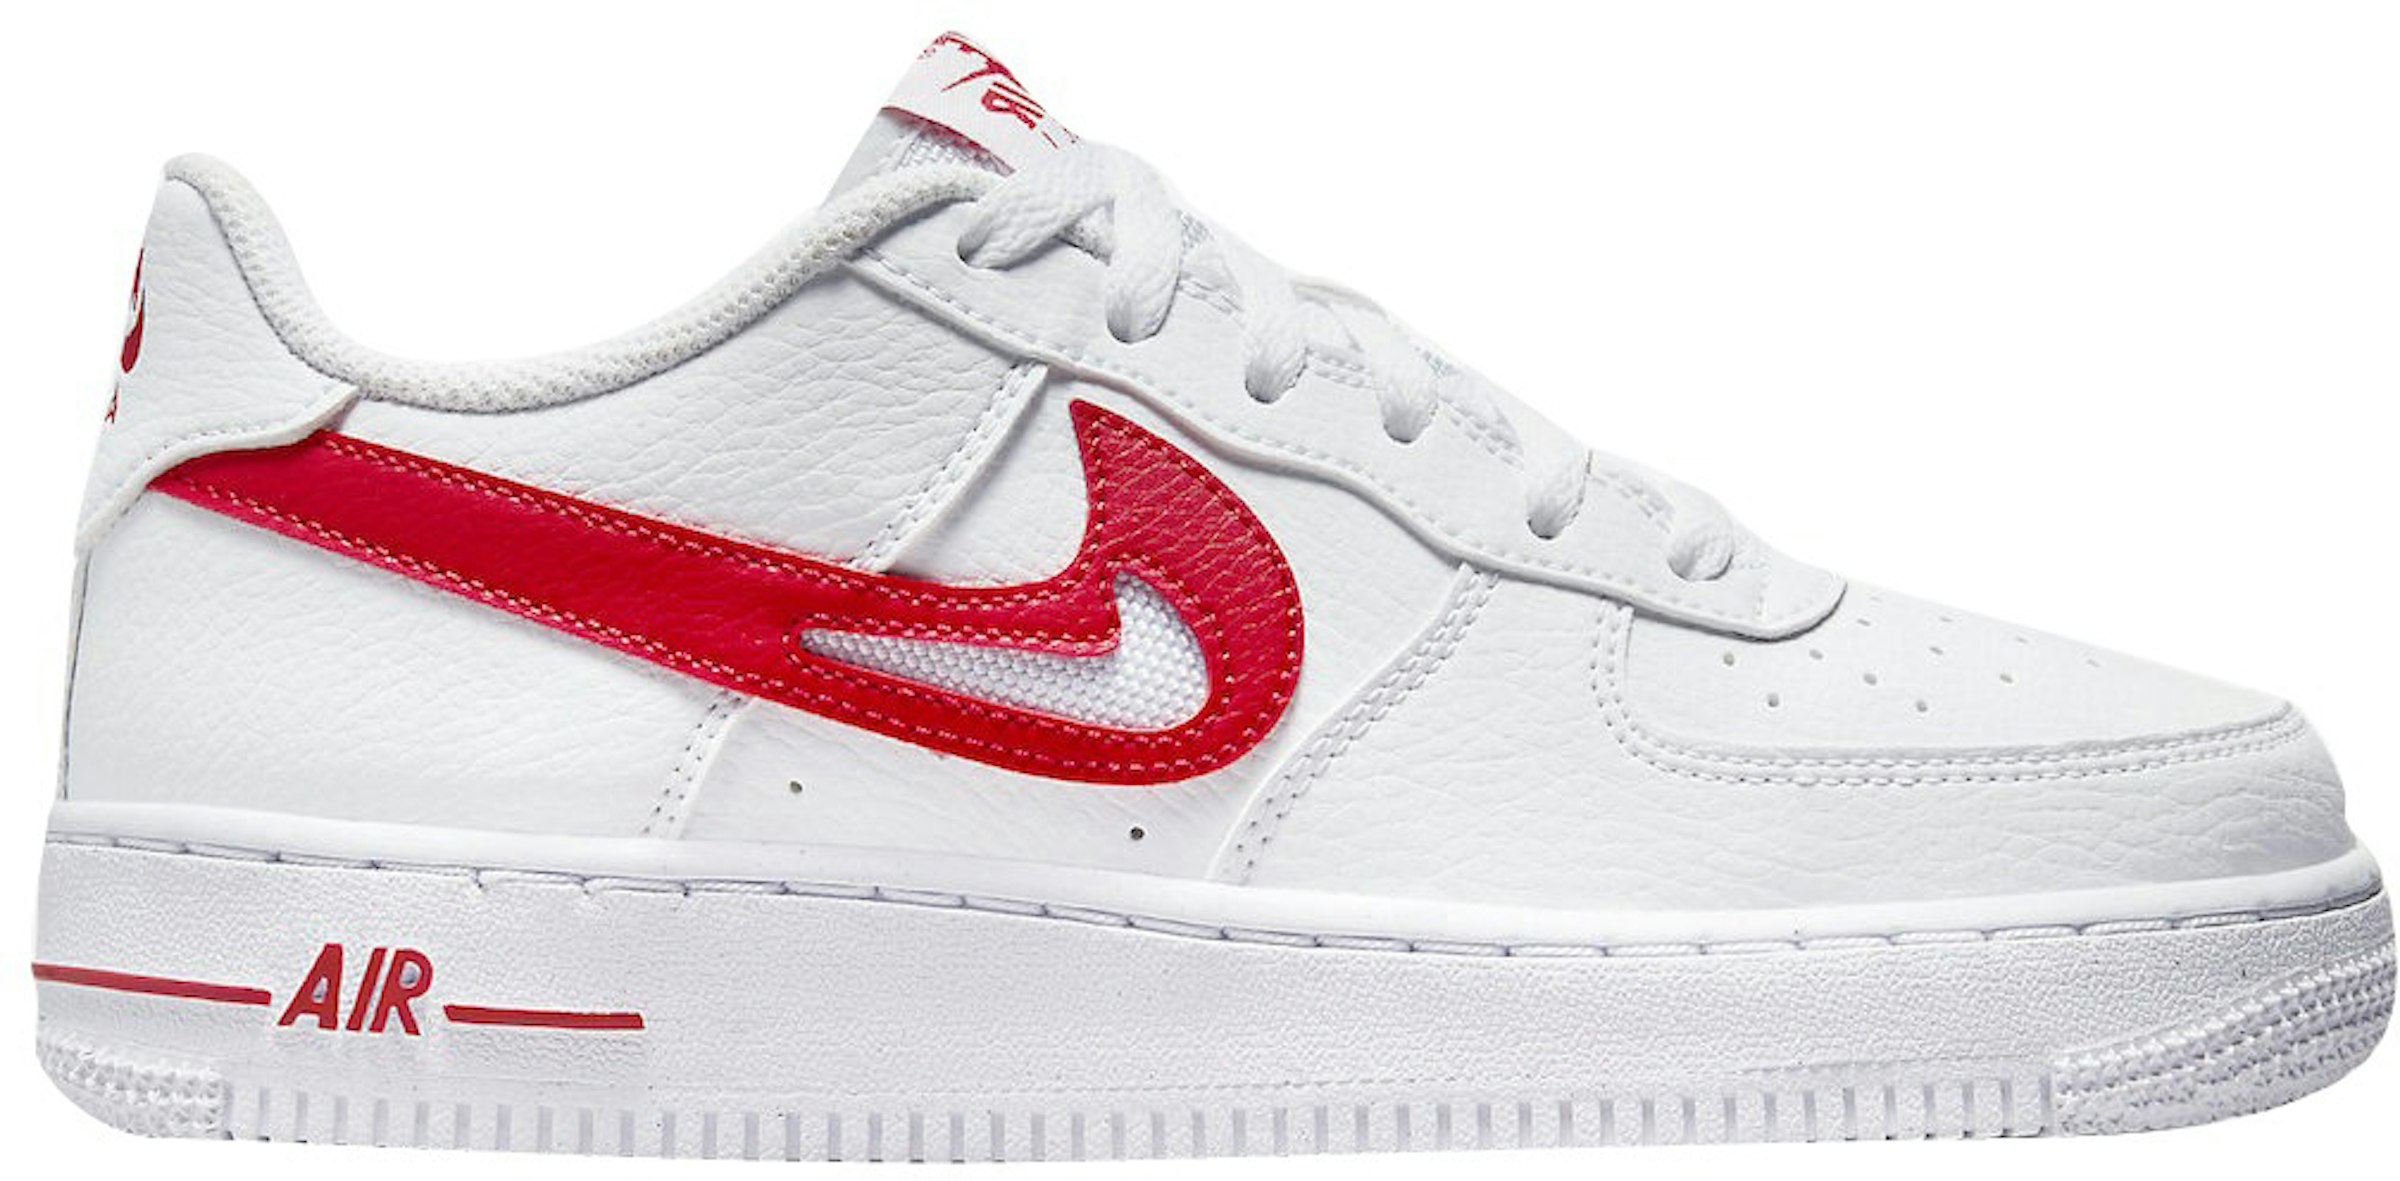 peligroso Maligno Desmañado Nike Air Force 1 Low White Red Cut-Out Swoosh (GS) Kids' - DR7970-100 - US